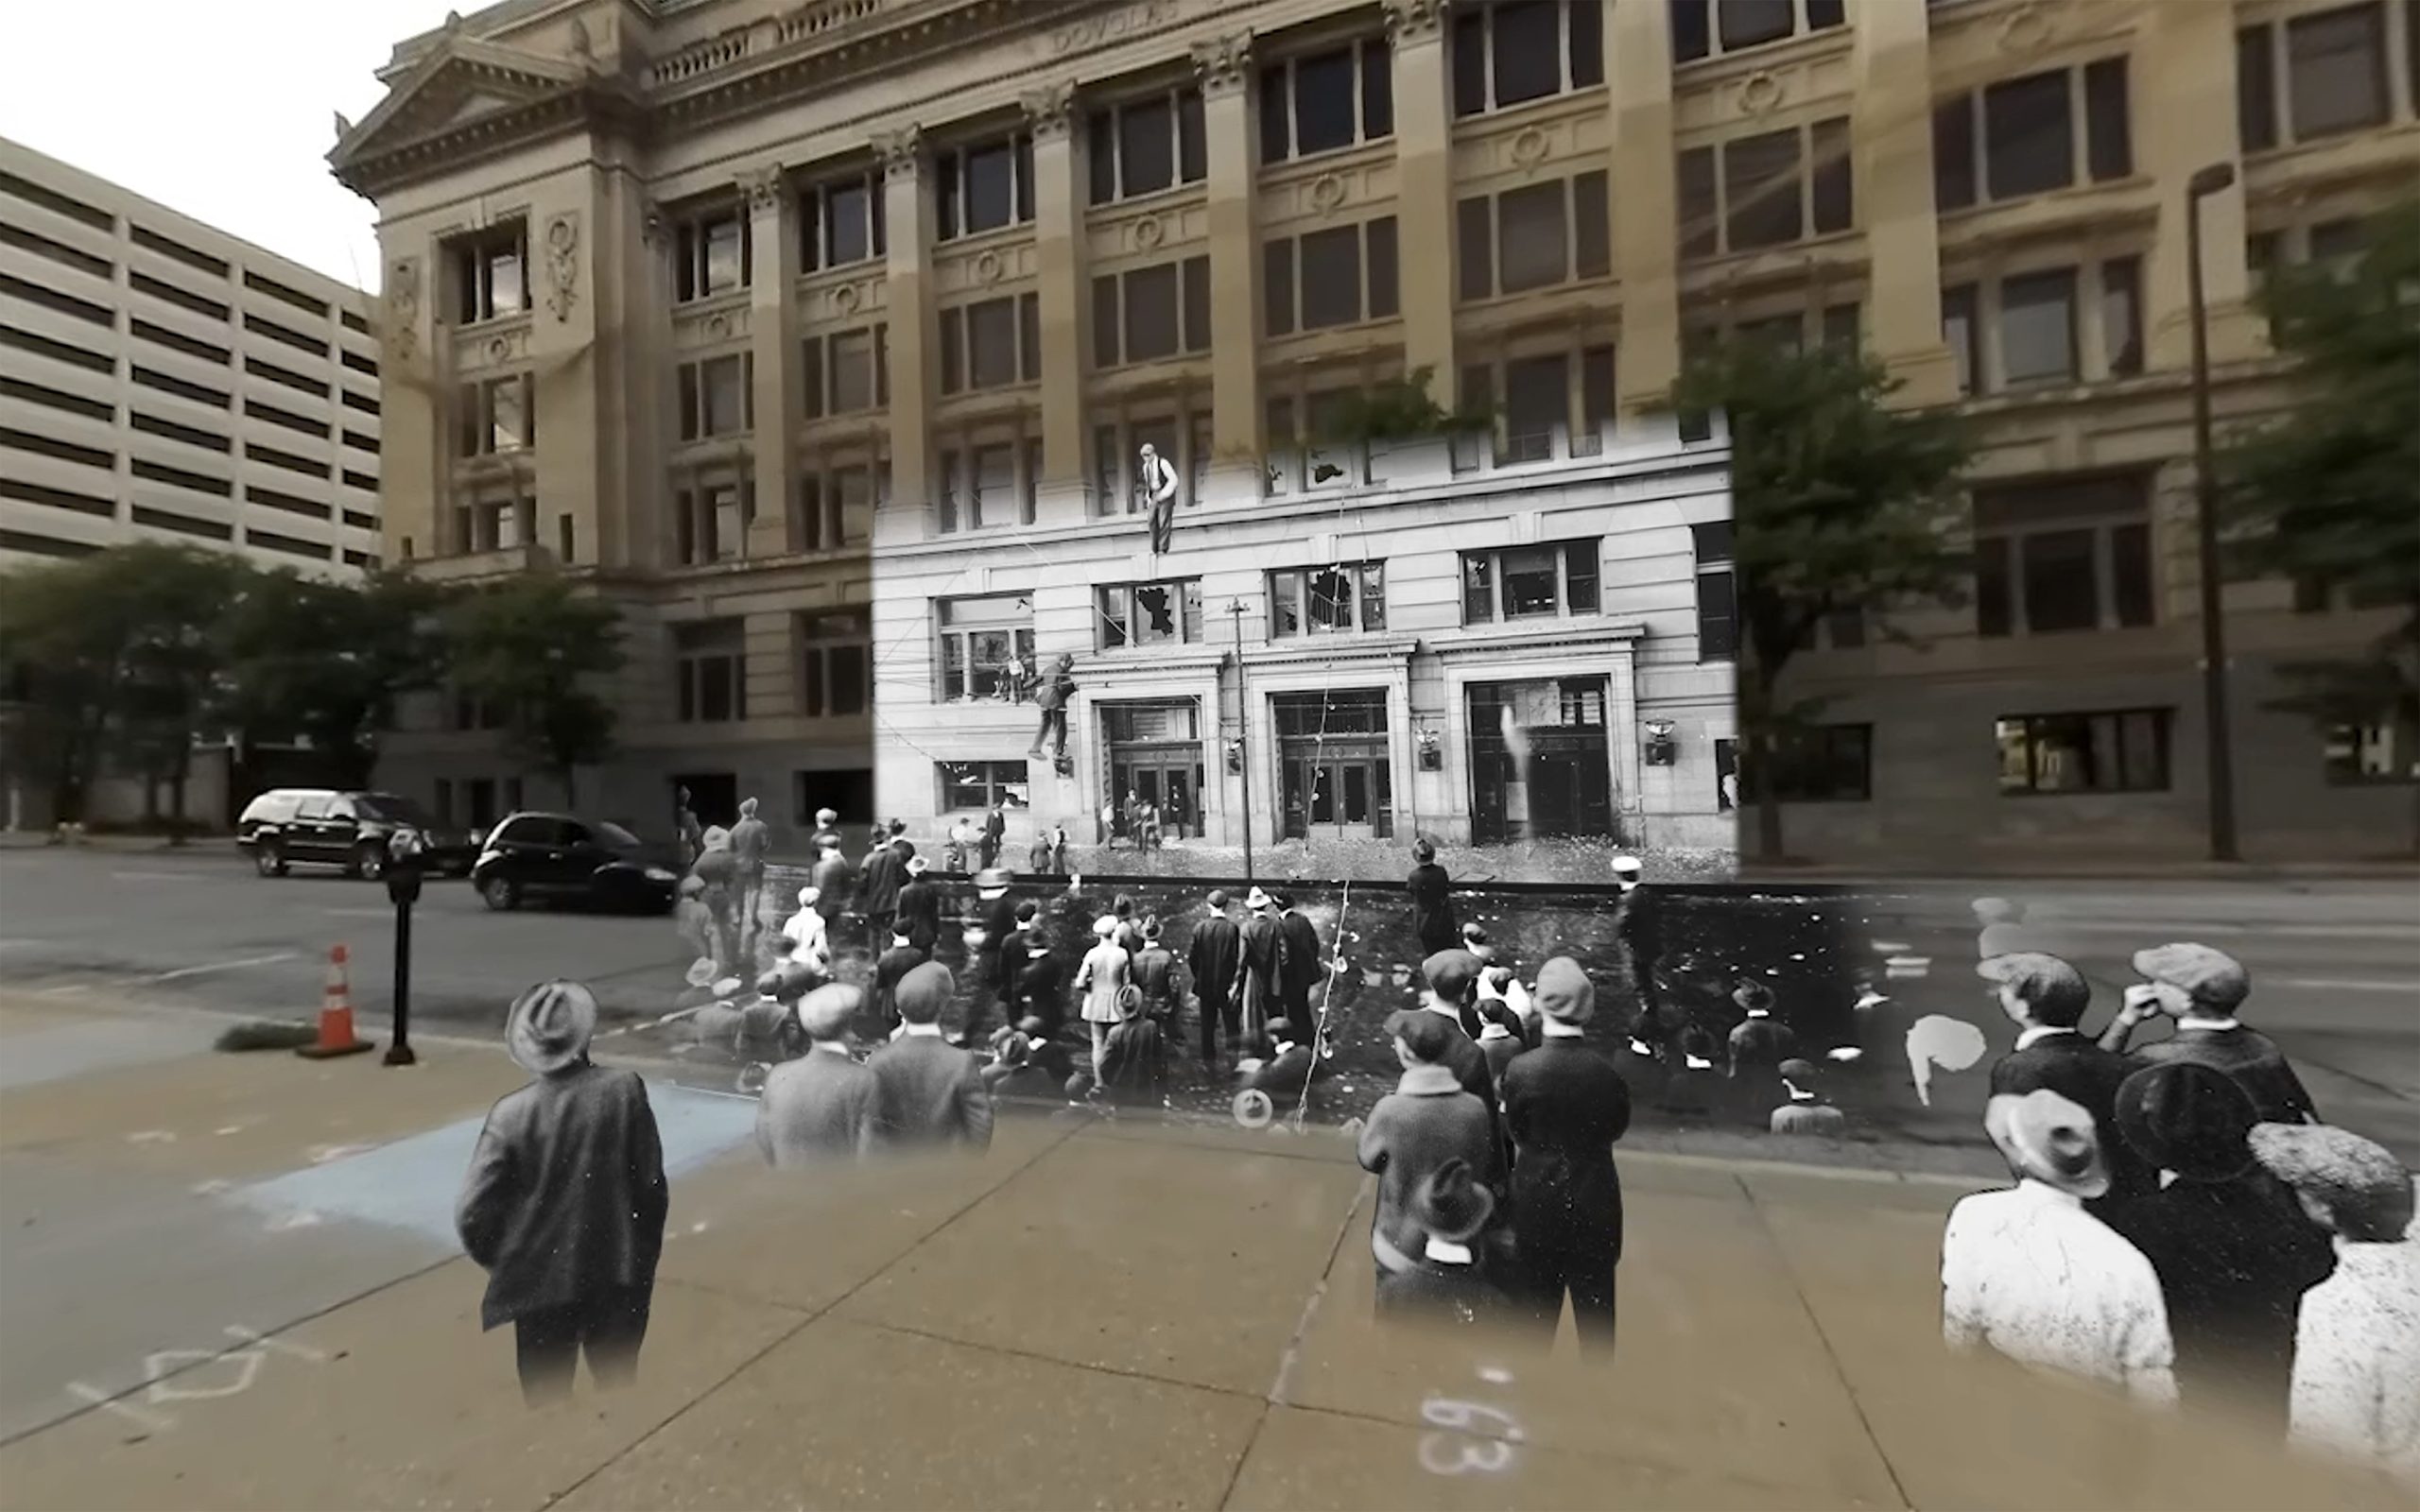 A black and white 1919 photograph of a crowd of white people descending on a courthouse, smashing windows, some climbing the building's facade, is layered on top of a contemporary color photograph of the same building.